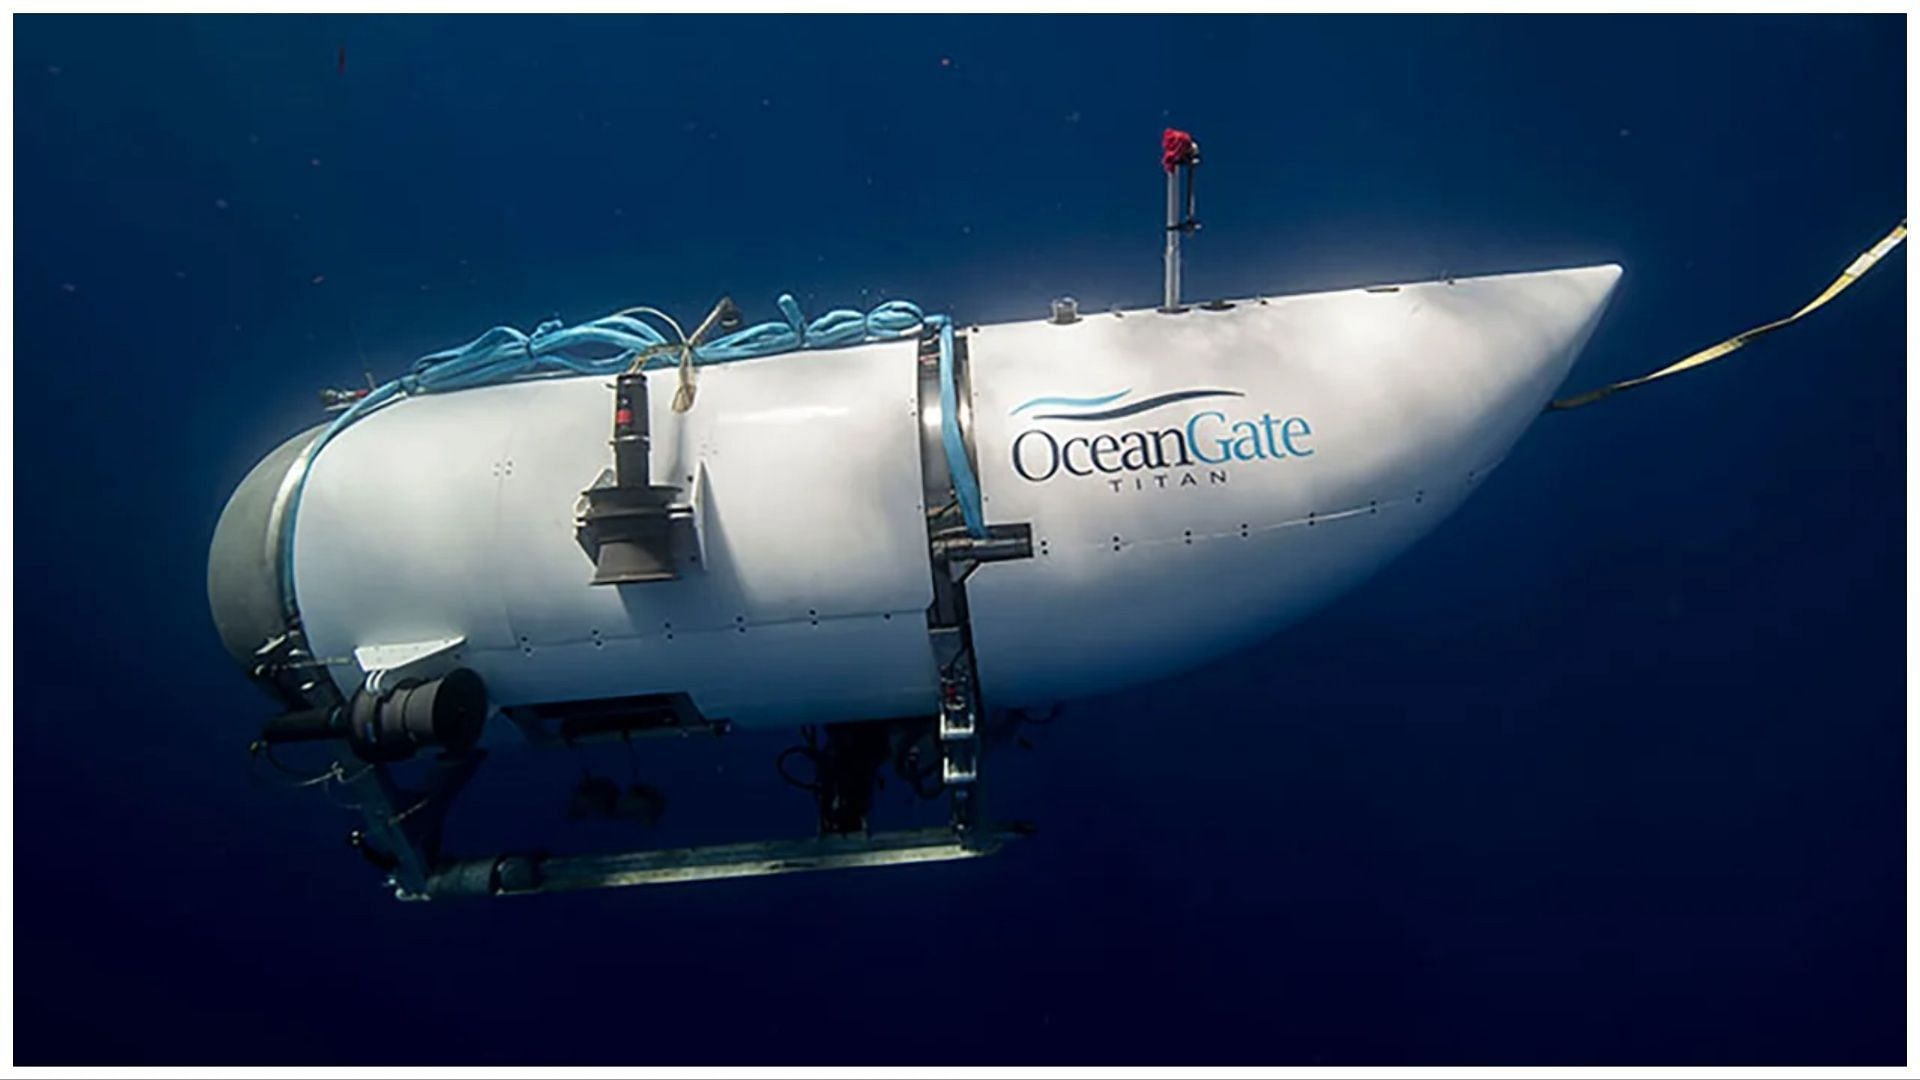 A search is underway for the Titanic-bound submarine that went missing on Sunday in the North Atlantic. (Image via OceanGate)